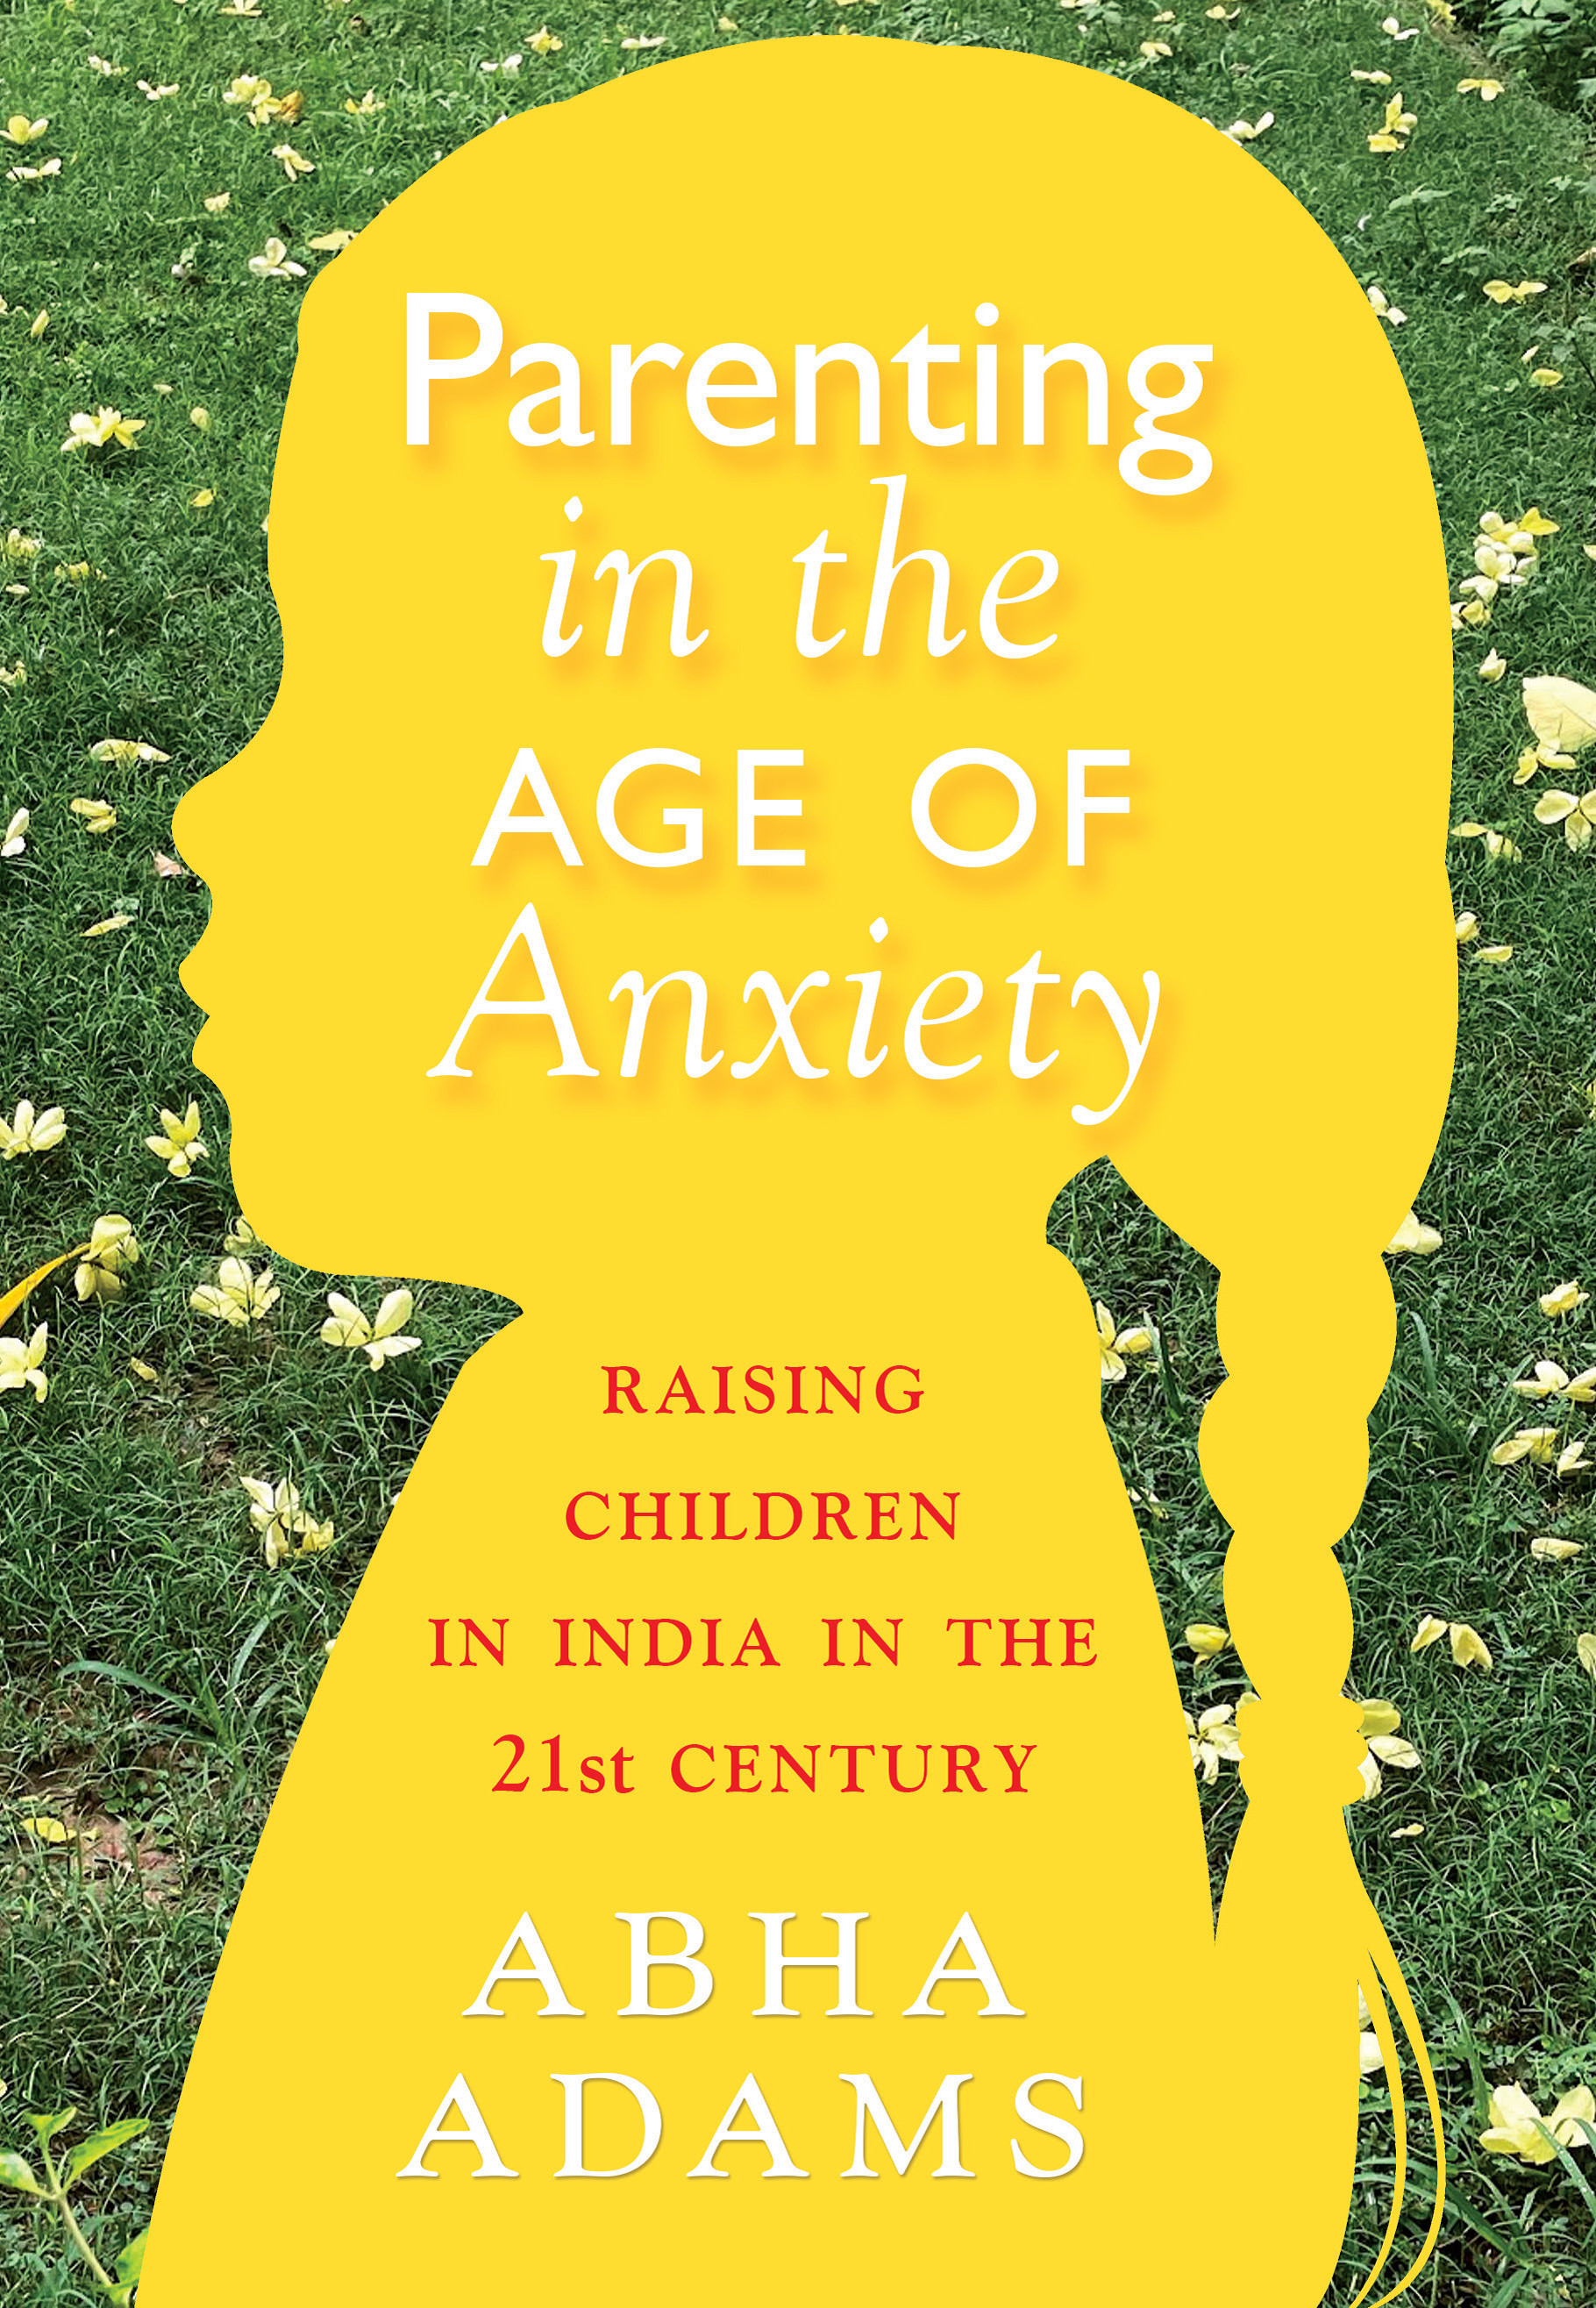 Parenting in the Age of Anxiety: Raising Children in India in the 21st Century